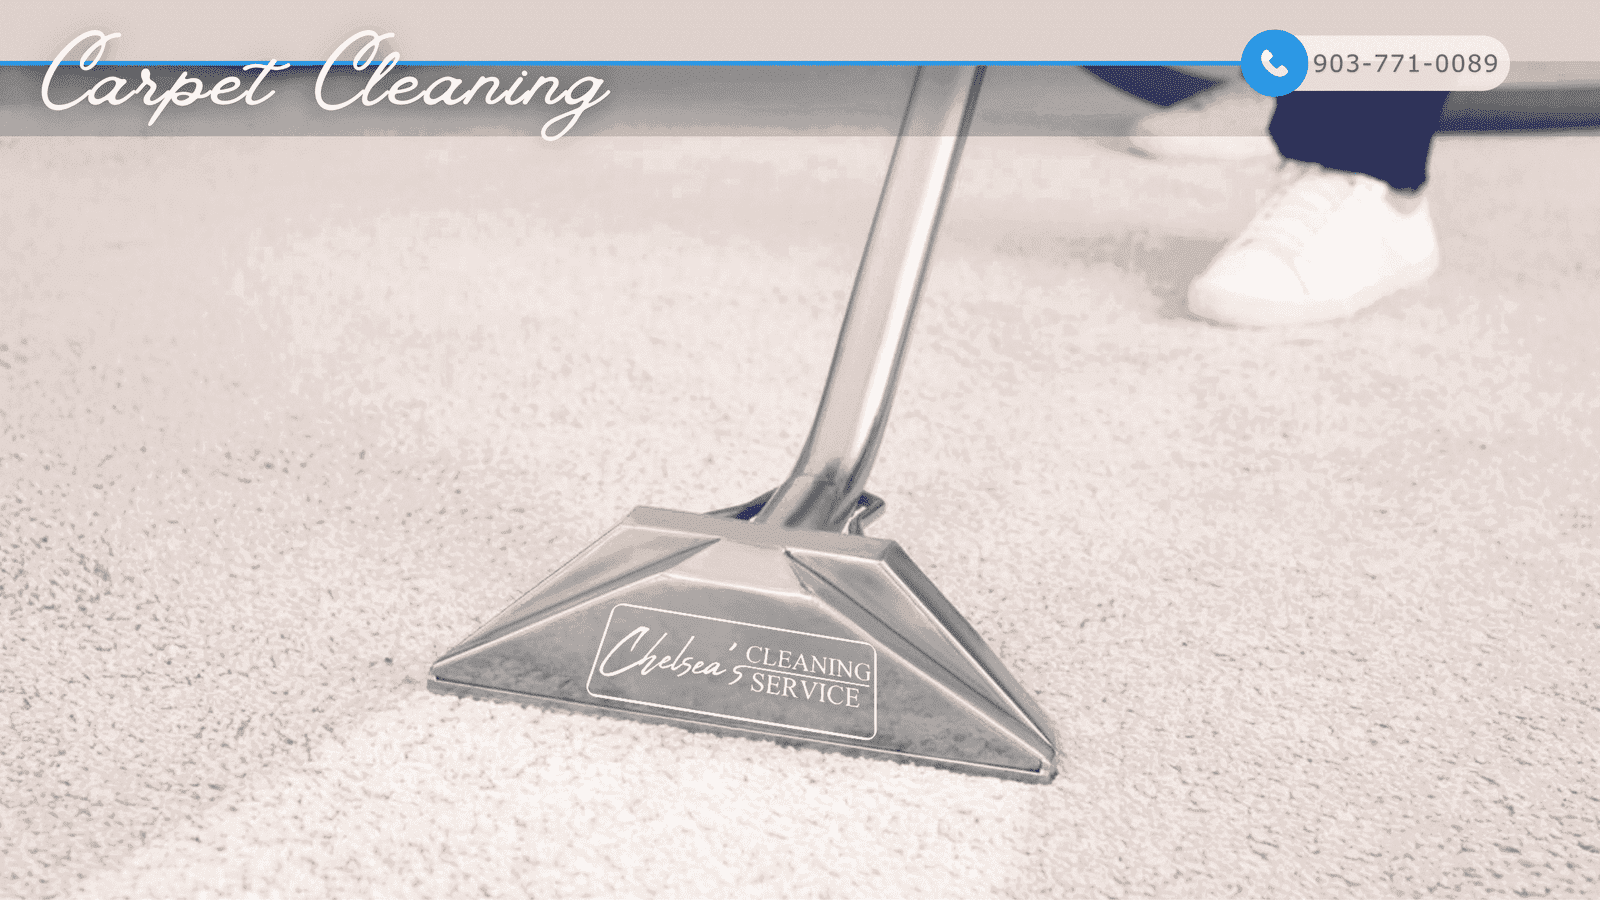 Best Carpet Cleaning Services near me Rugs Cleaning Carpet Shampooing